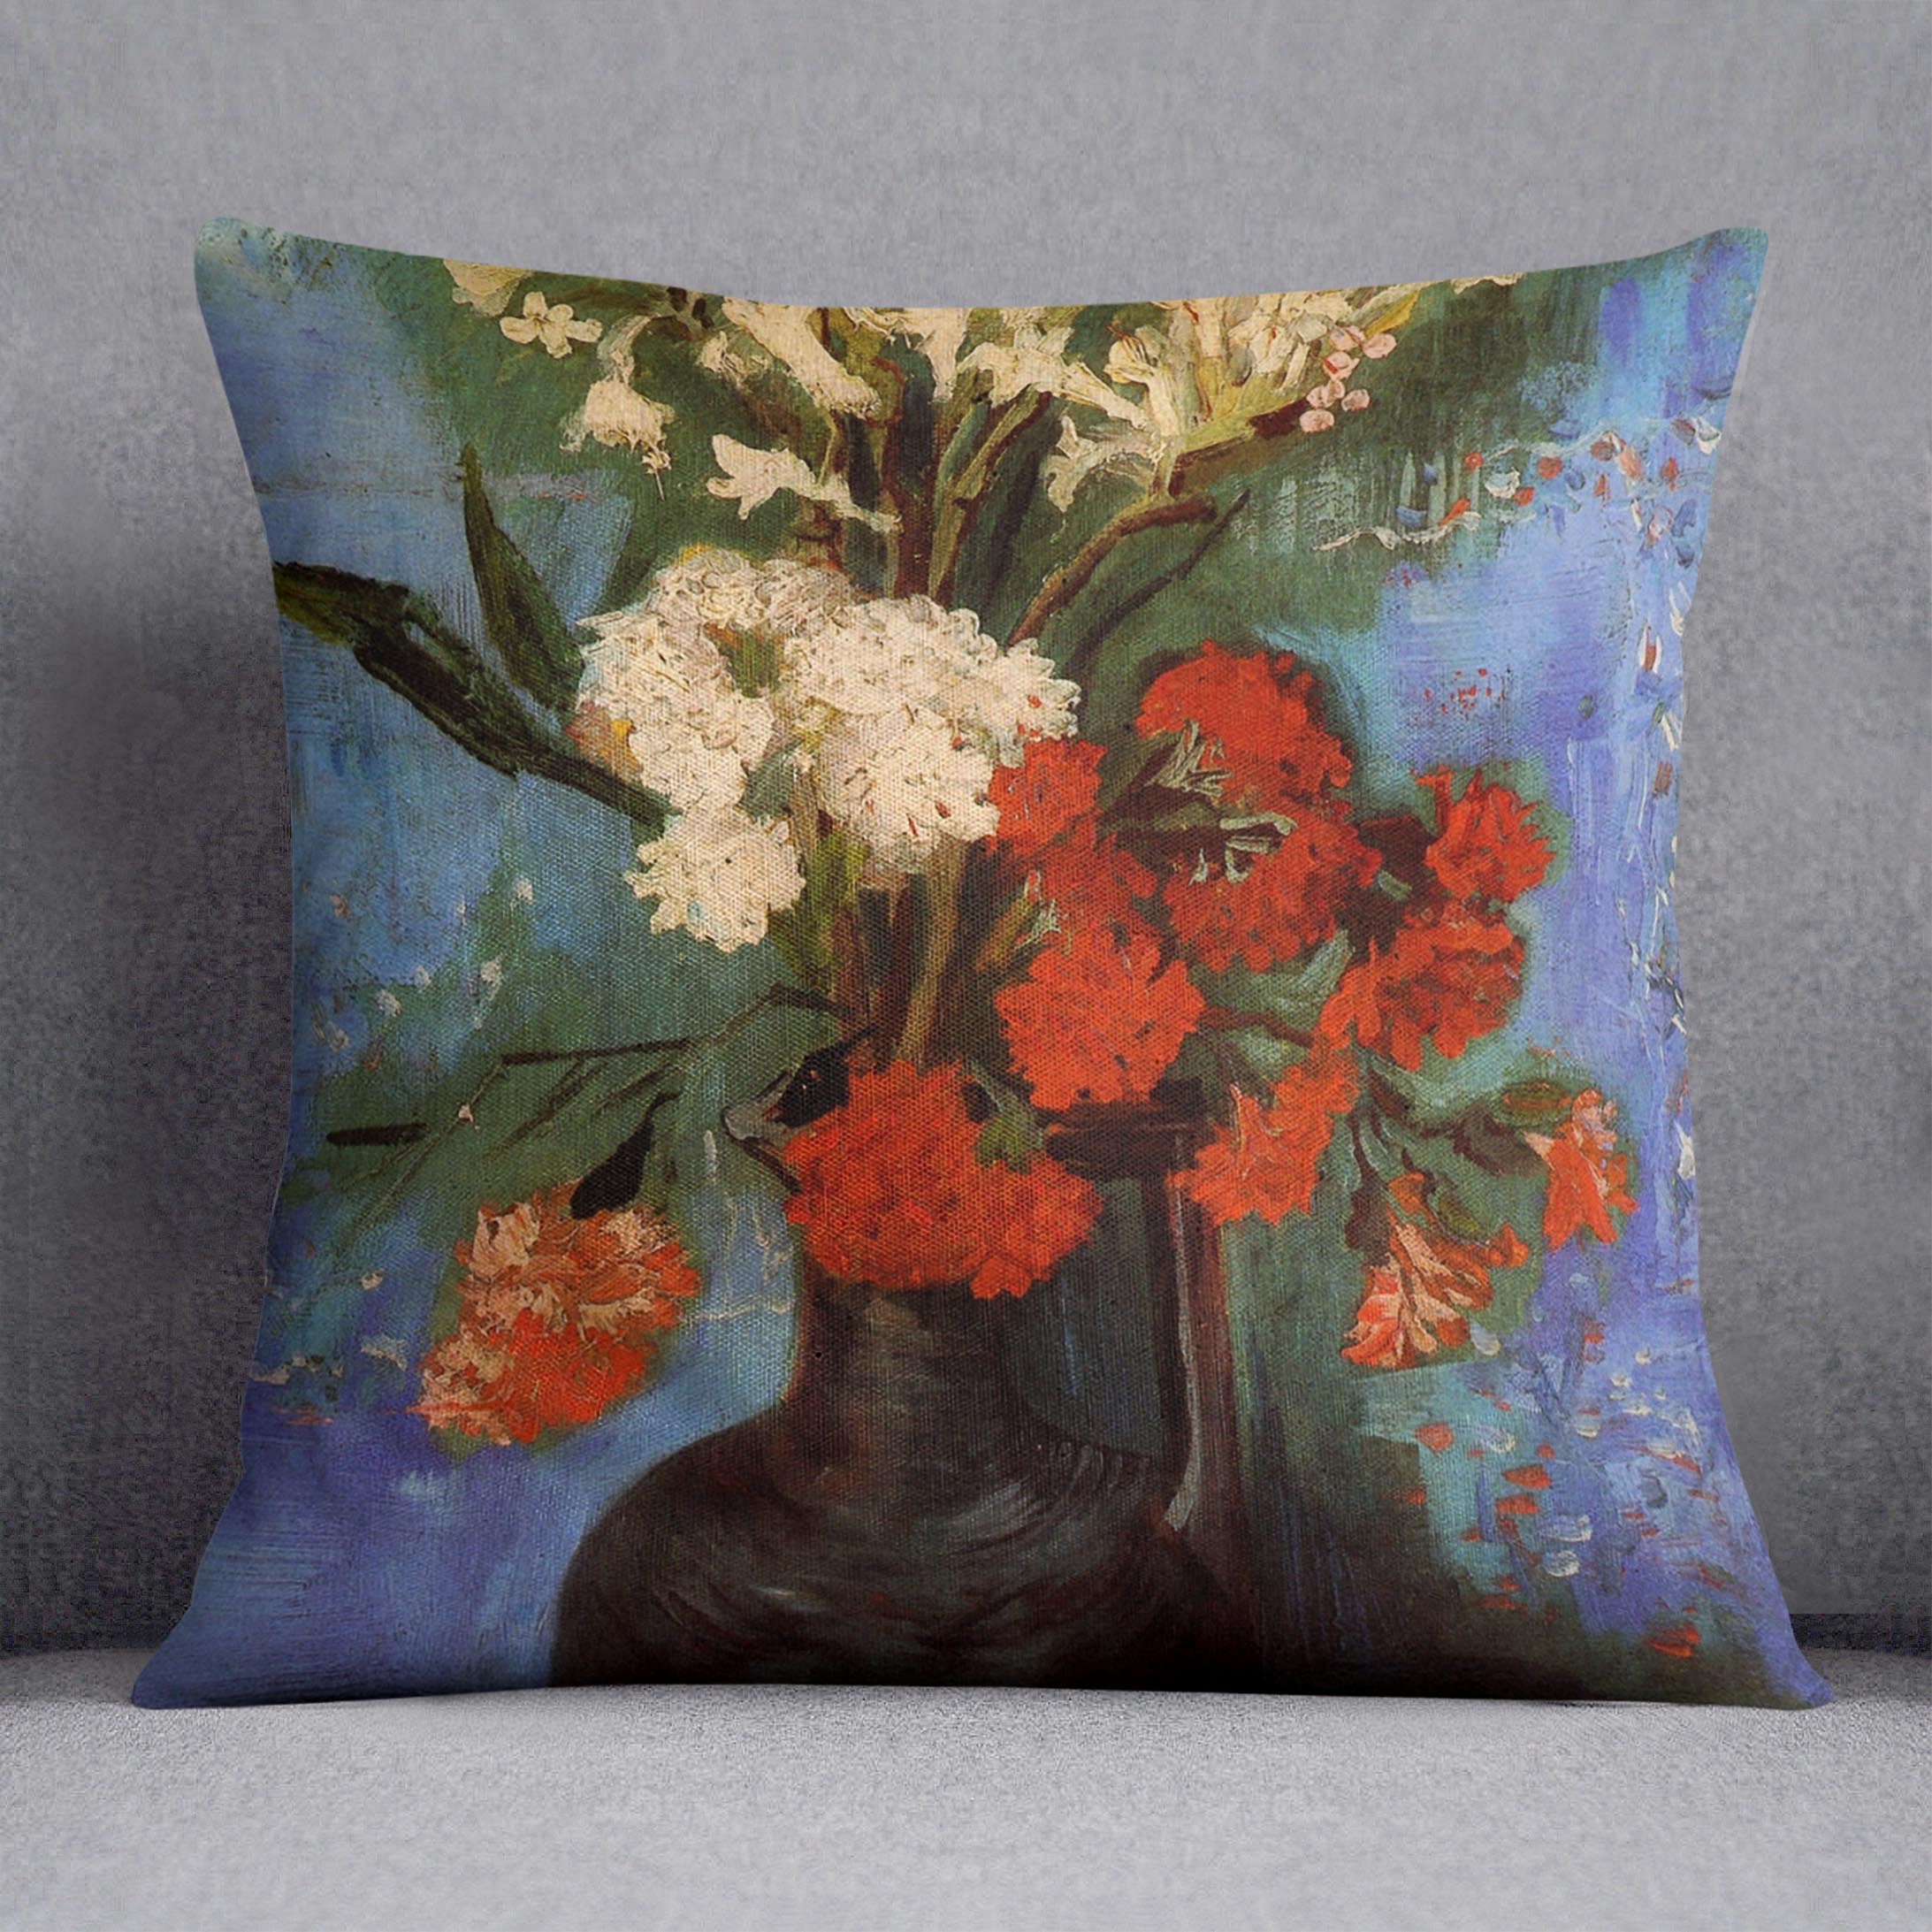 Vase with Carnations and Other Flowers by Van Gogh Cushion